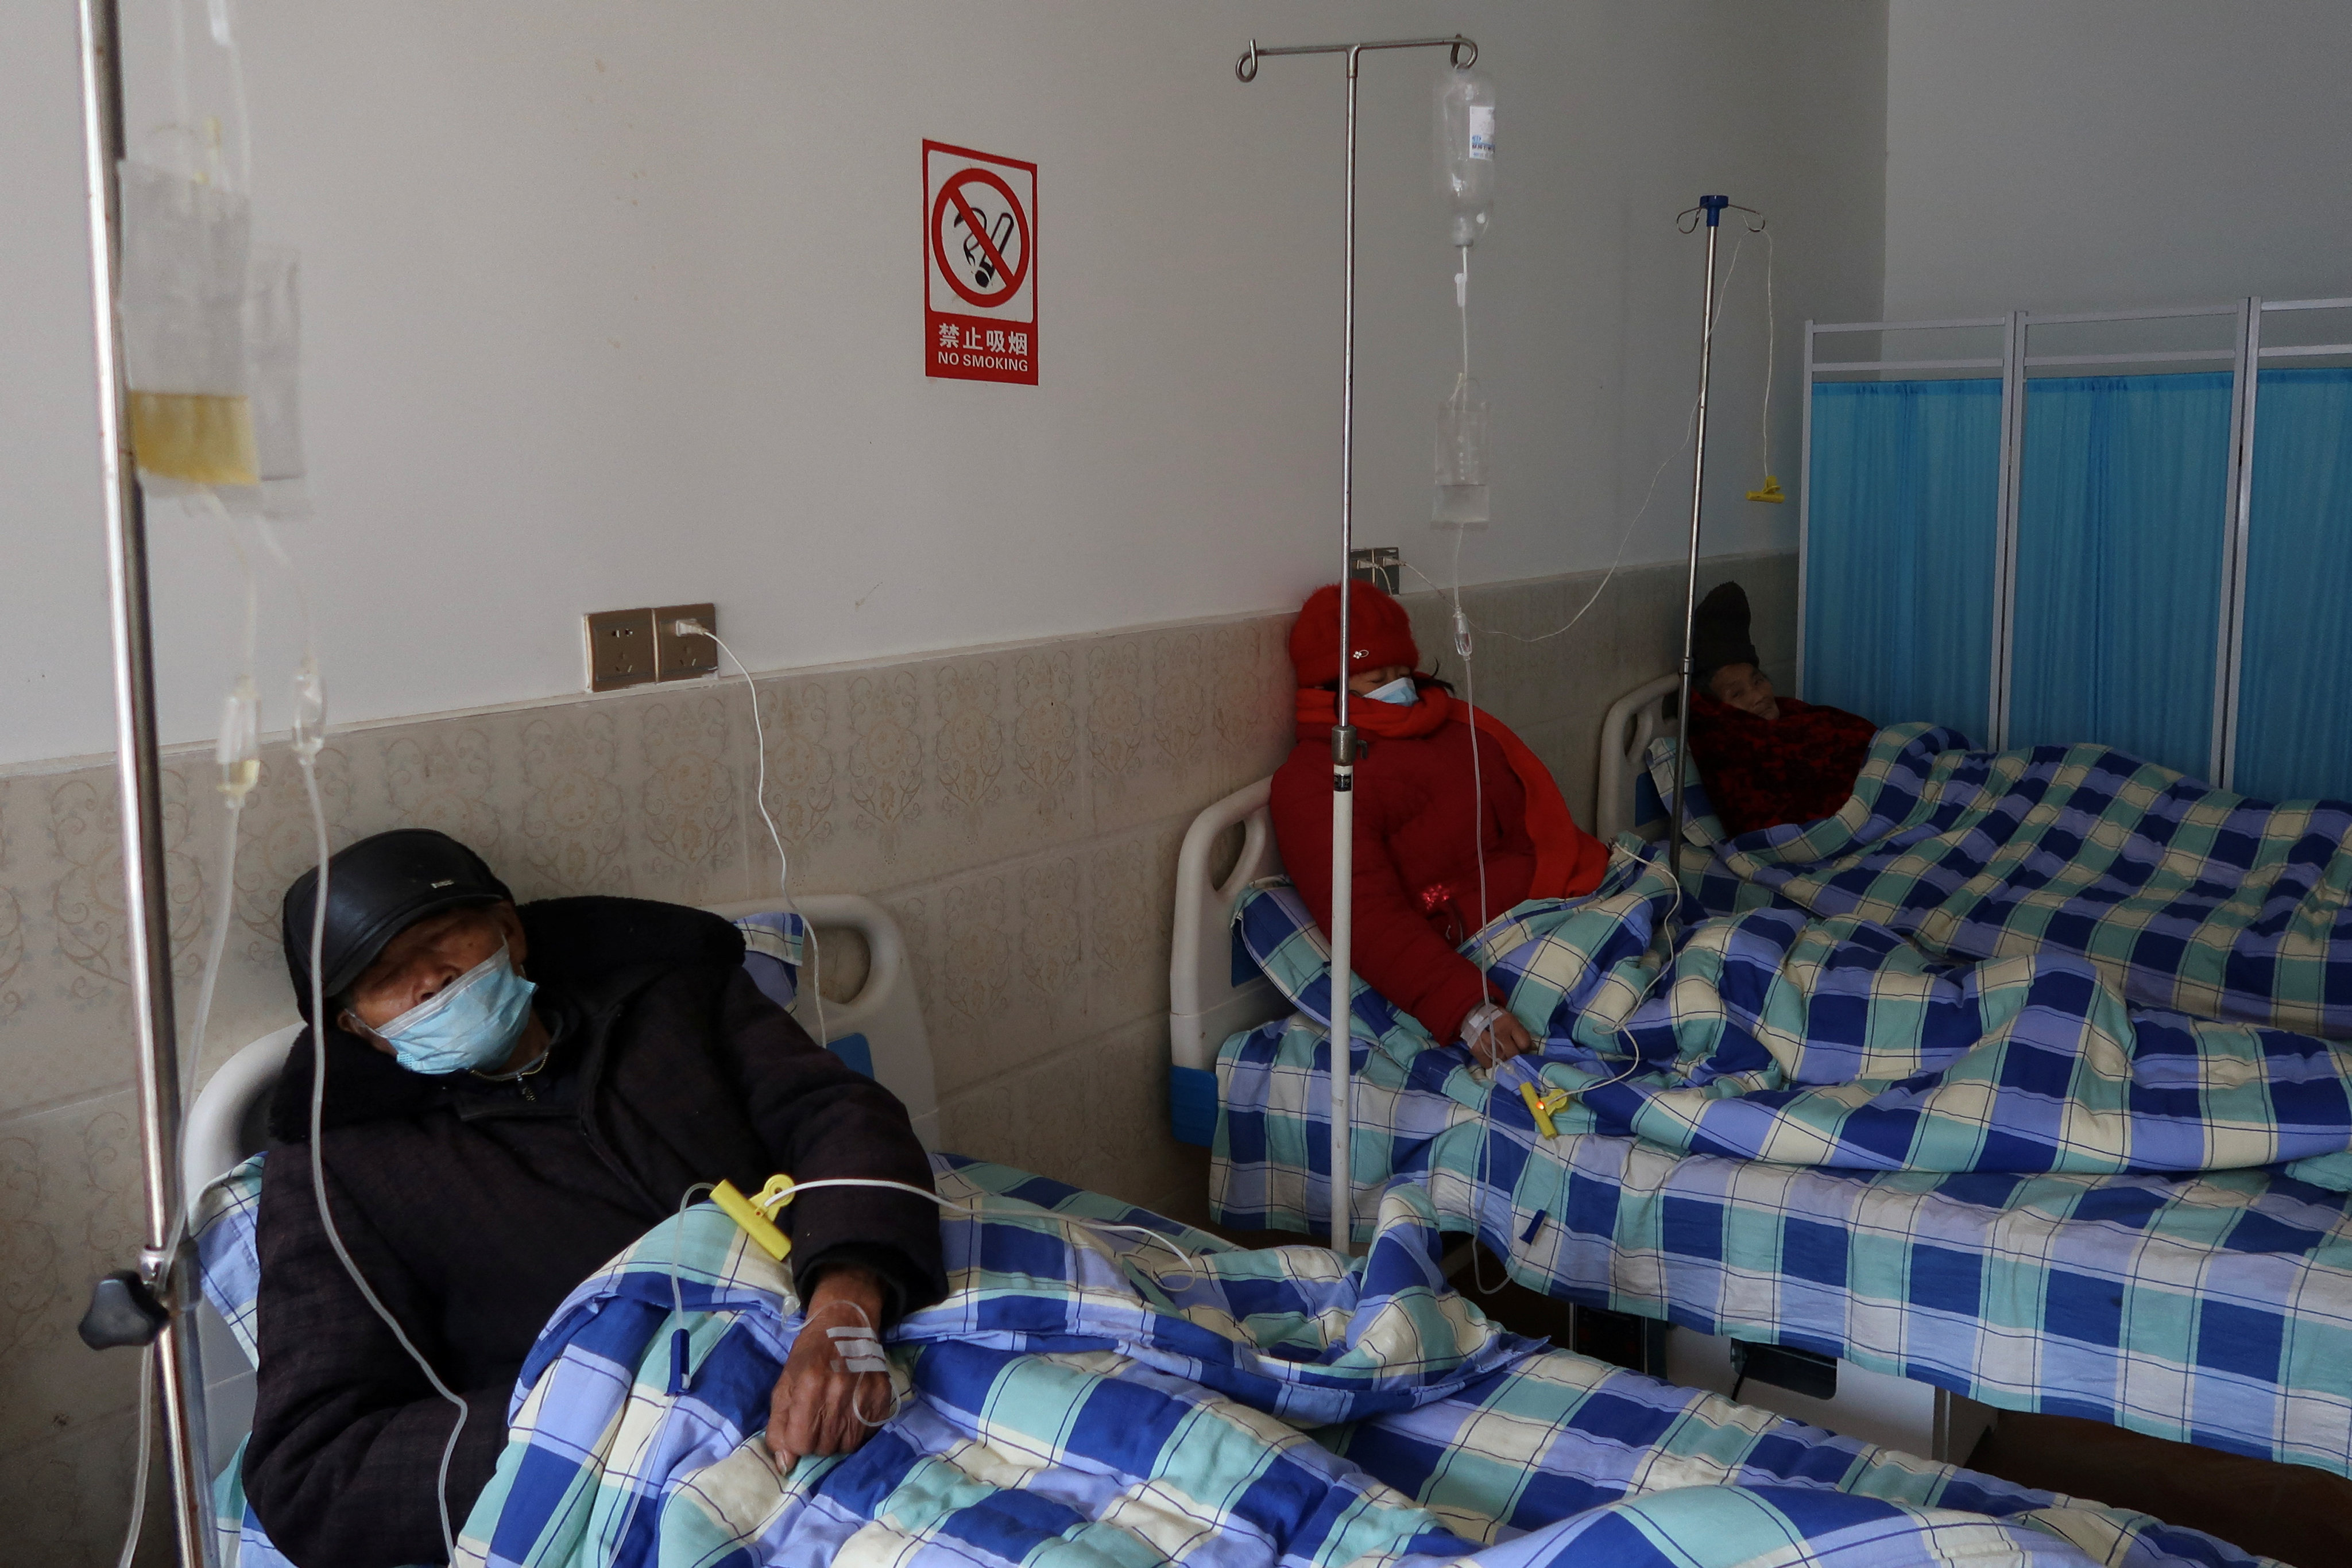 By lumping asymptomatic and mild cases together, Beijing gave people the ‘wrong expectation’, about infection severity, experts say. Photo: Reuters